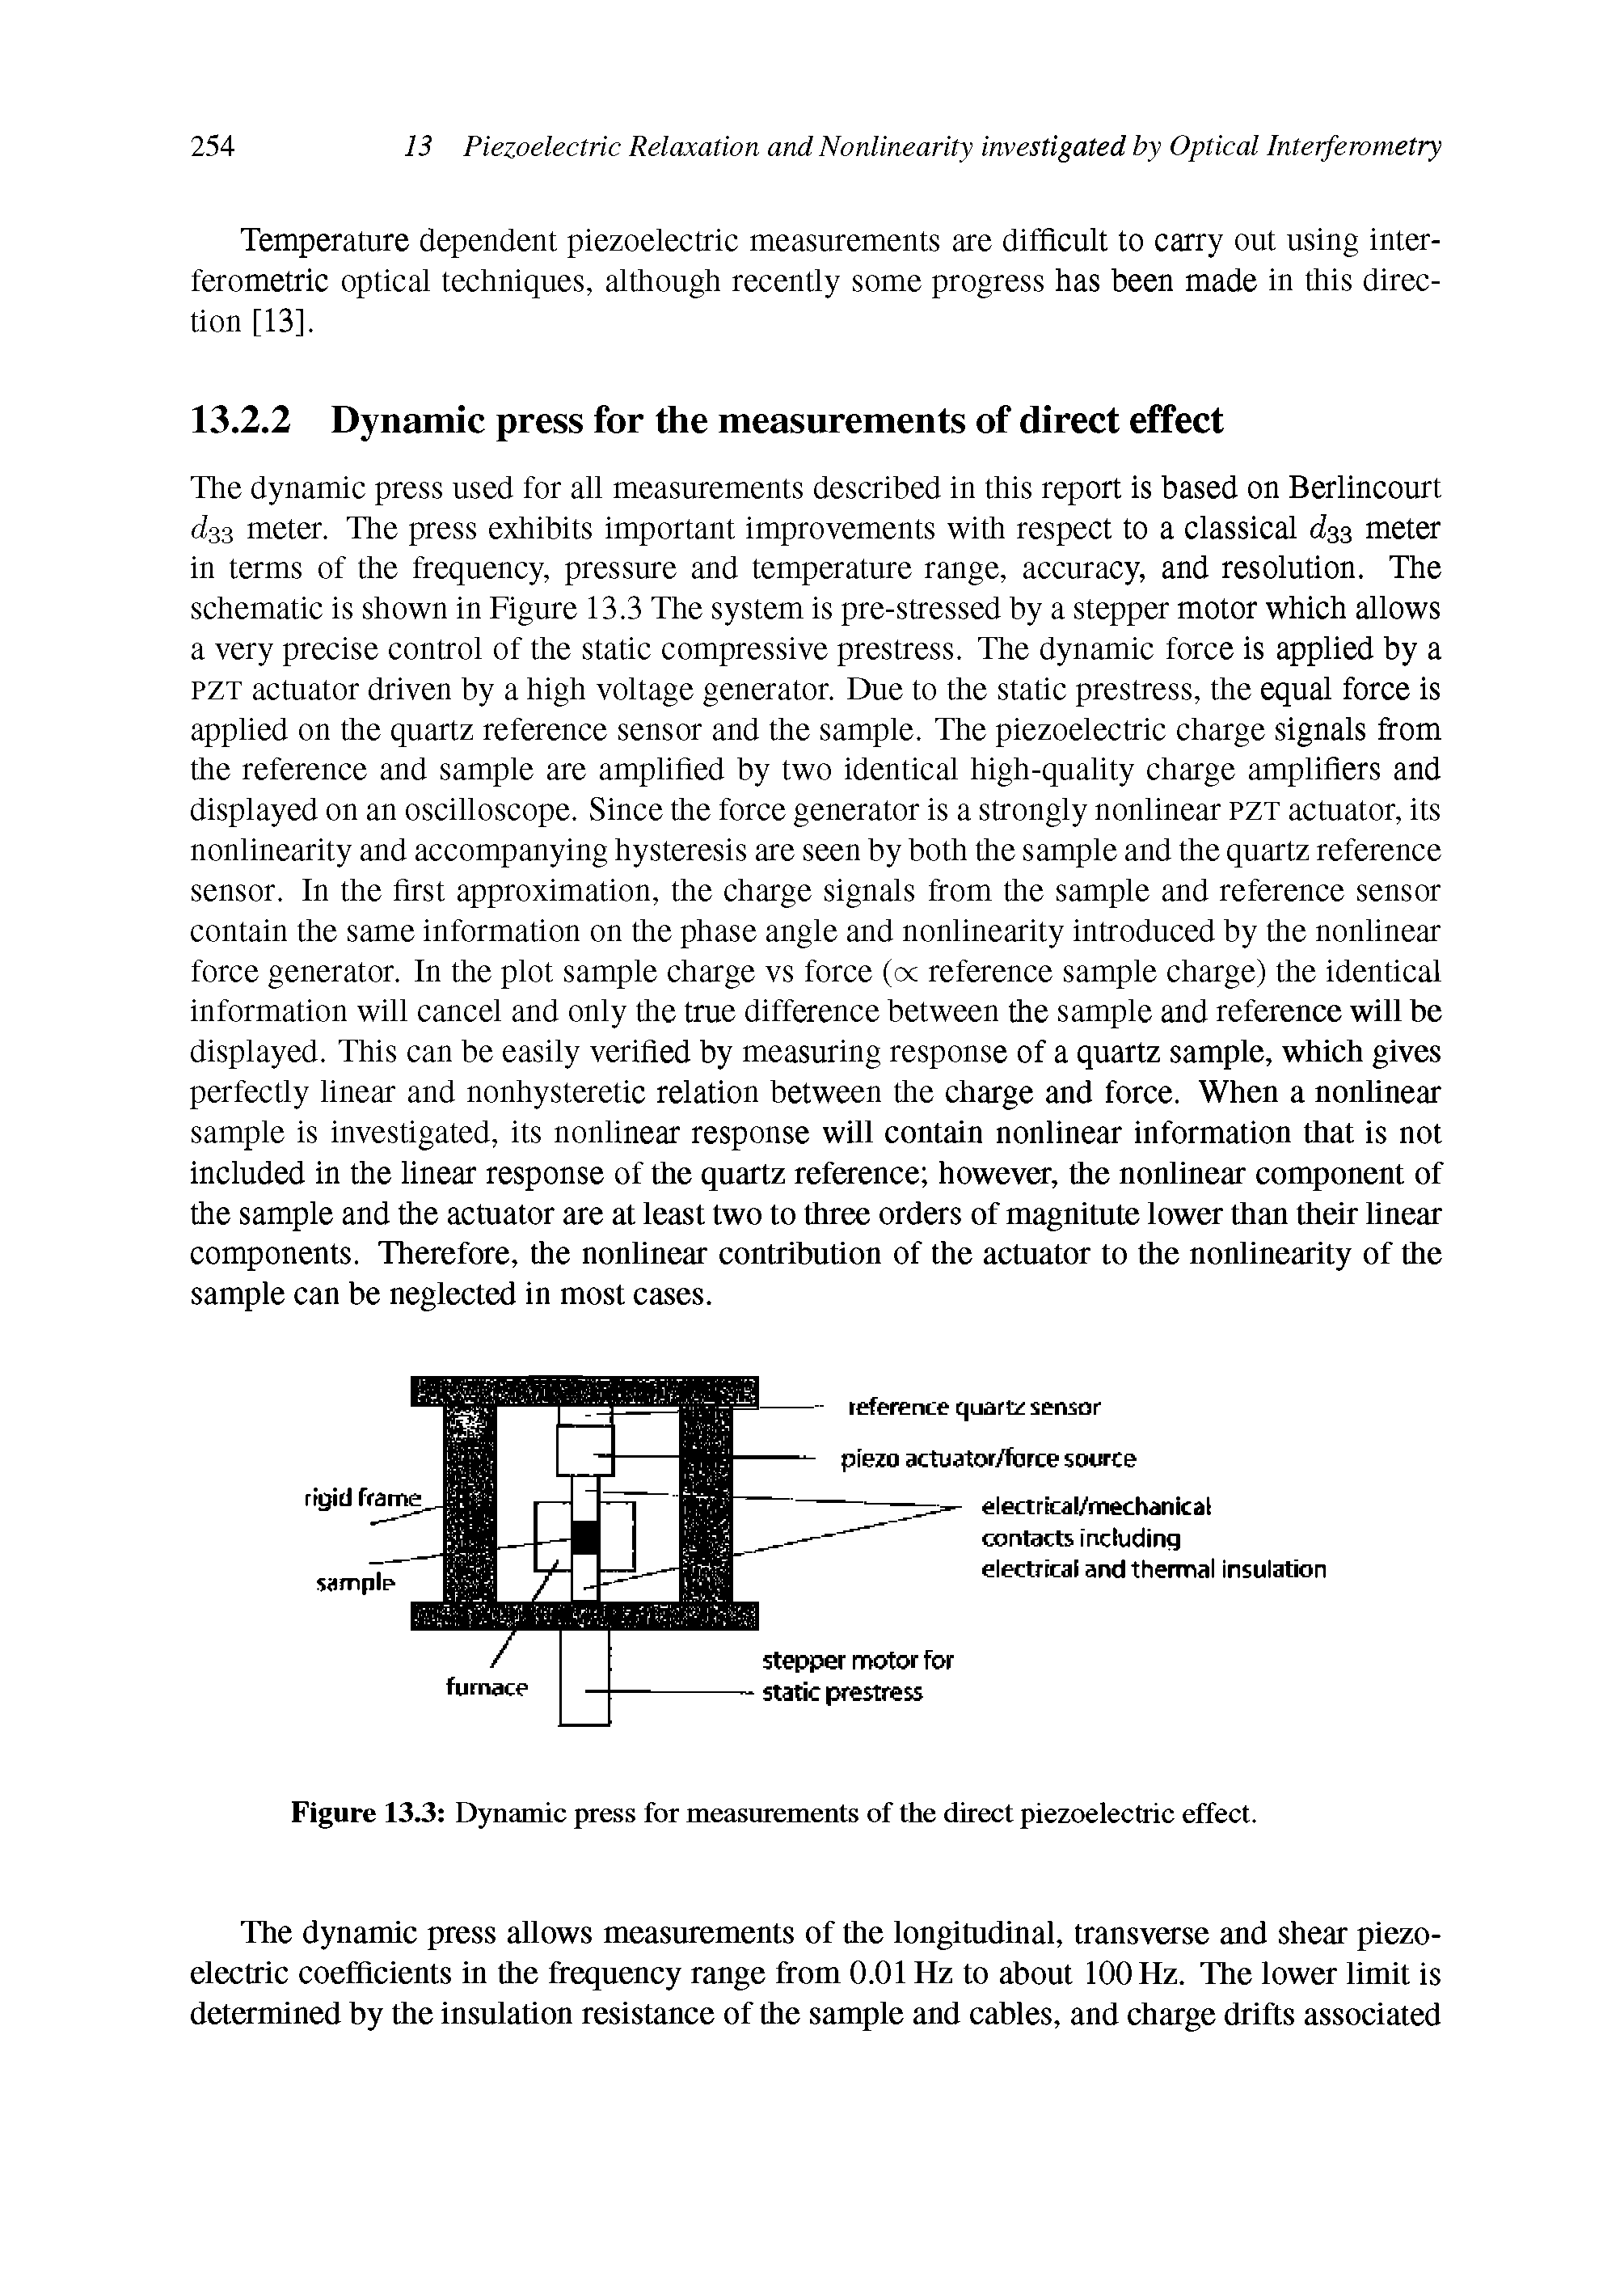 Figure 13.3 Dynamic press for measurements of the direct piezoelectric effect.